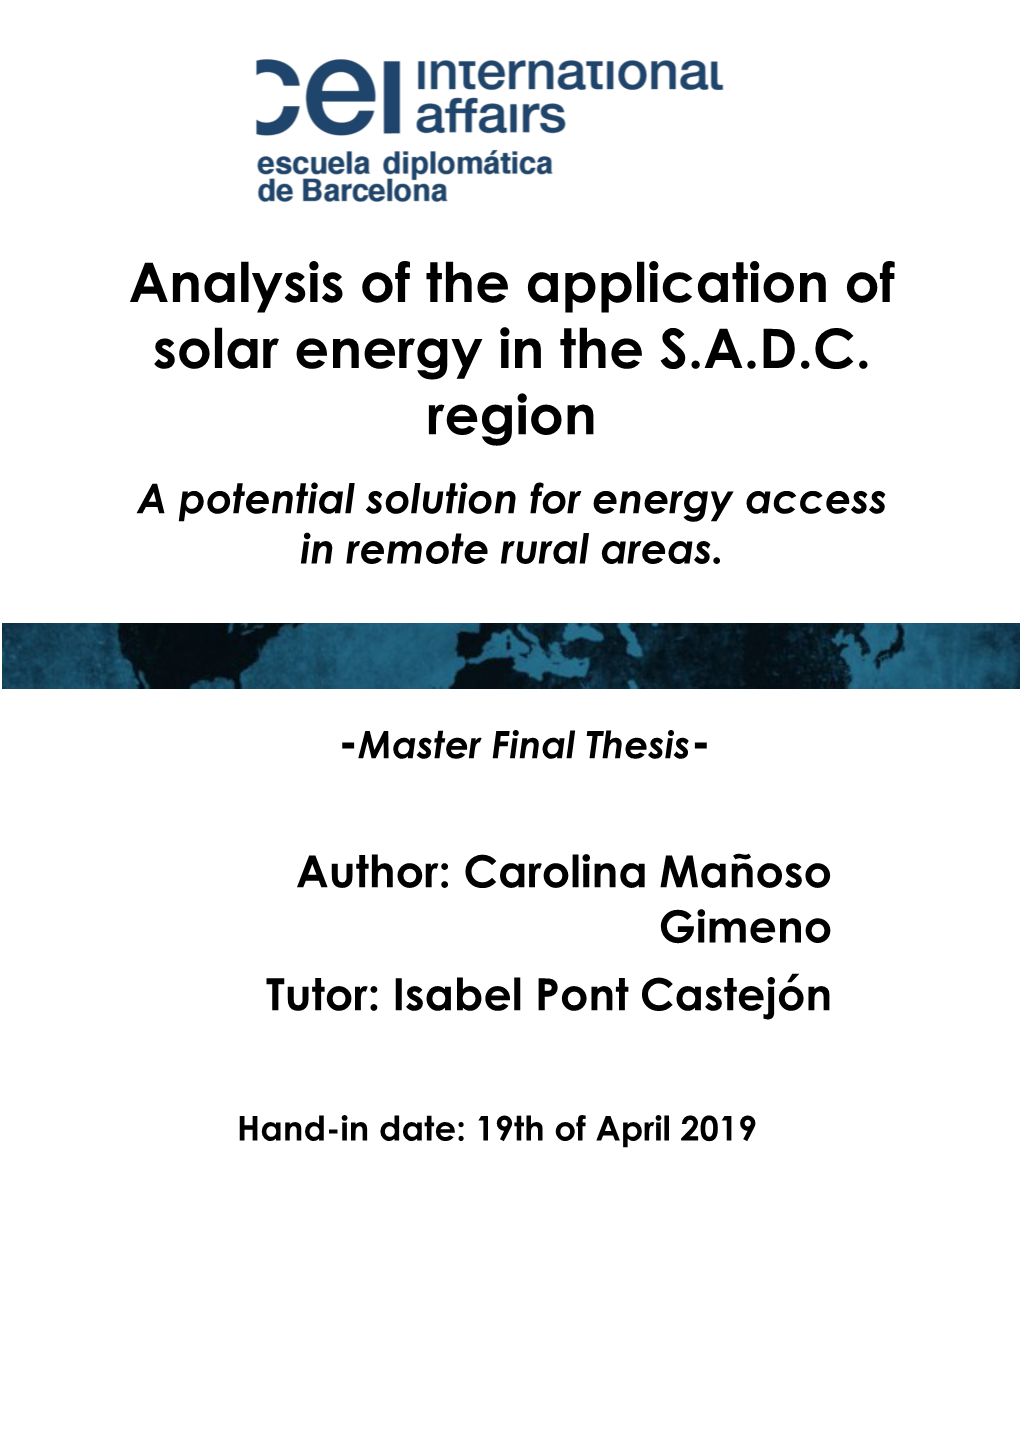 Analysis of the Application of Solar Energy in the S.A.D.C. Region a Potential Solution for Energy Access in Remote Rural Areas